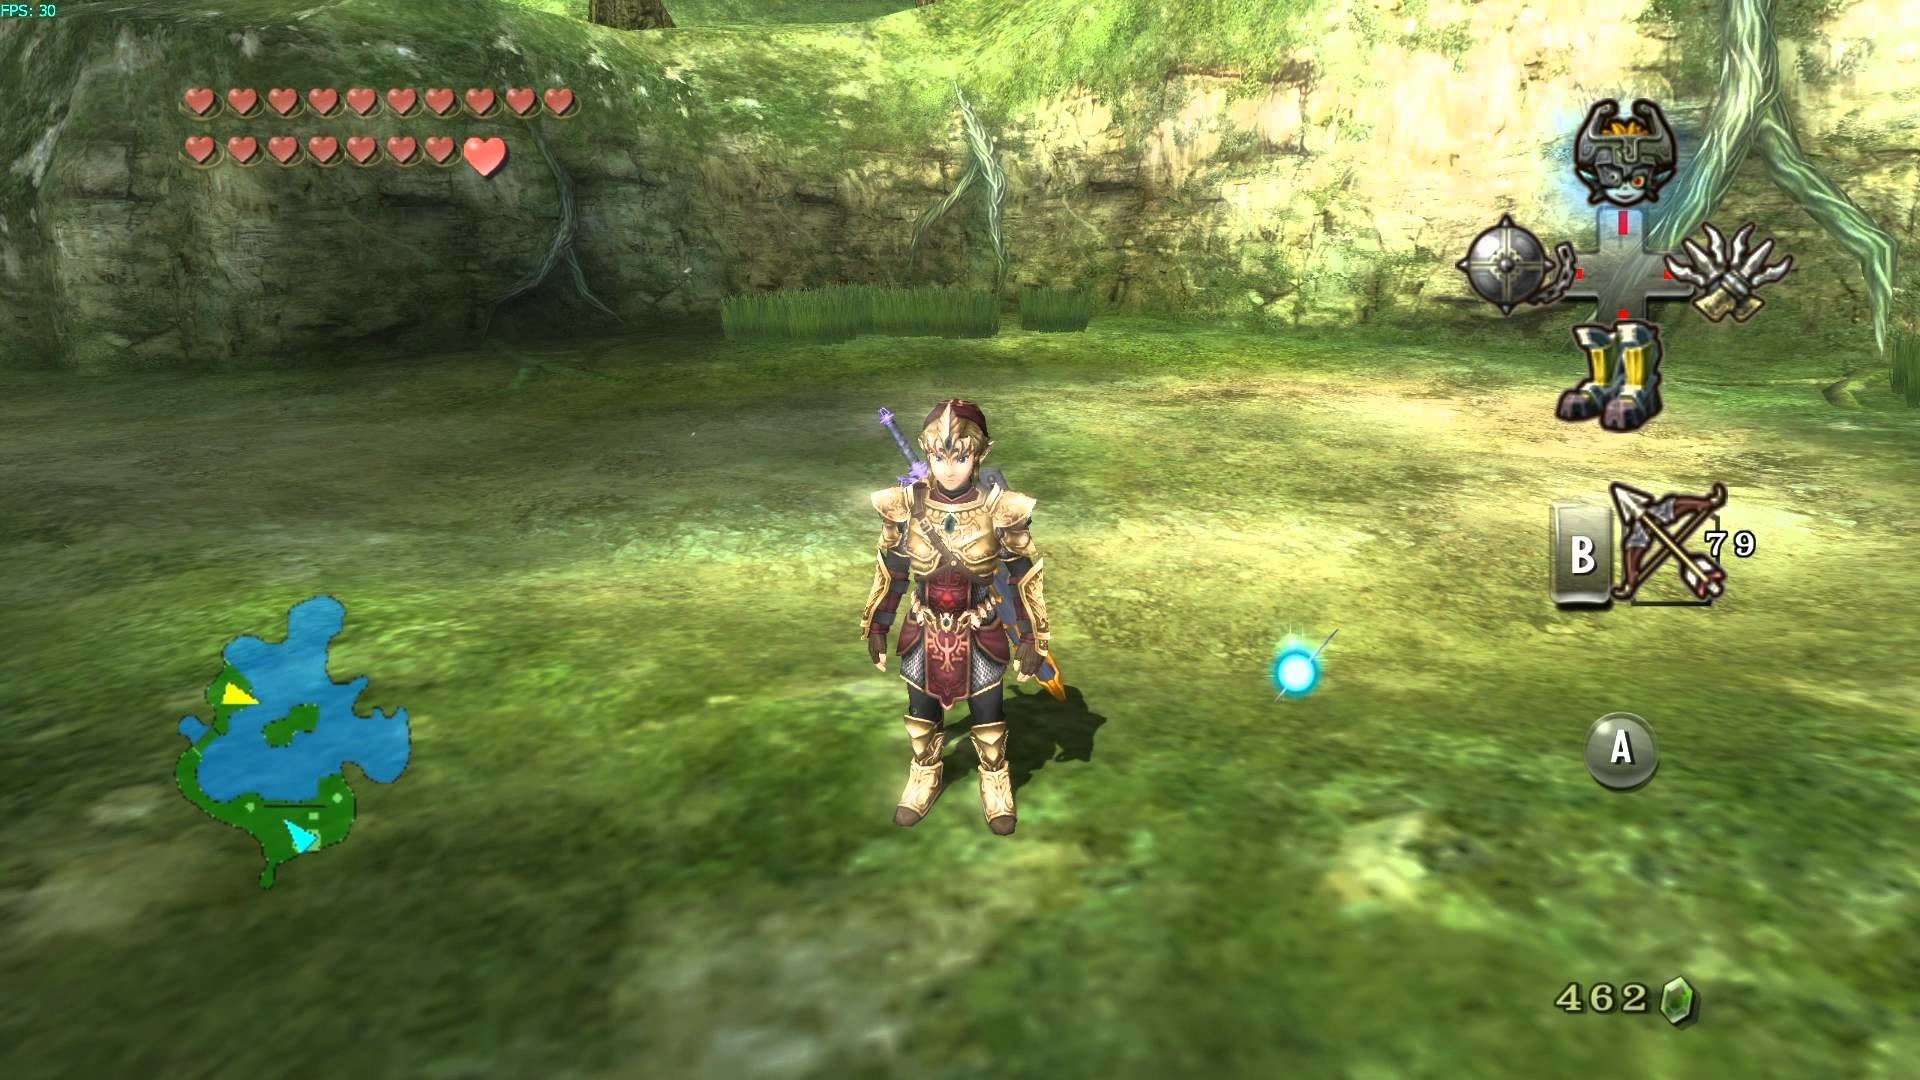 1920x1080 'The Legend of Zelda: Twilight Princess HD': Wii U Release Date, Wii Remote  and Nunchuk Compatible